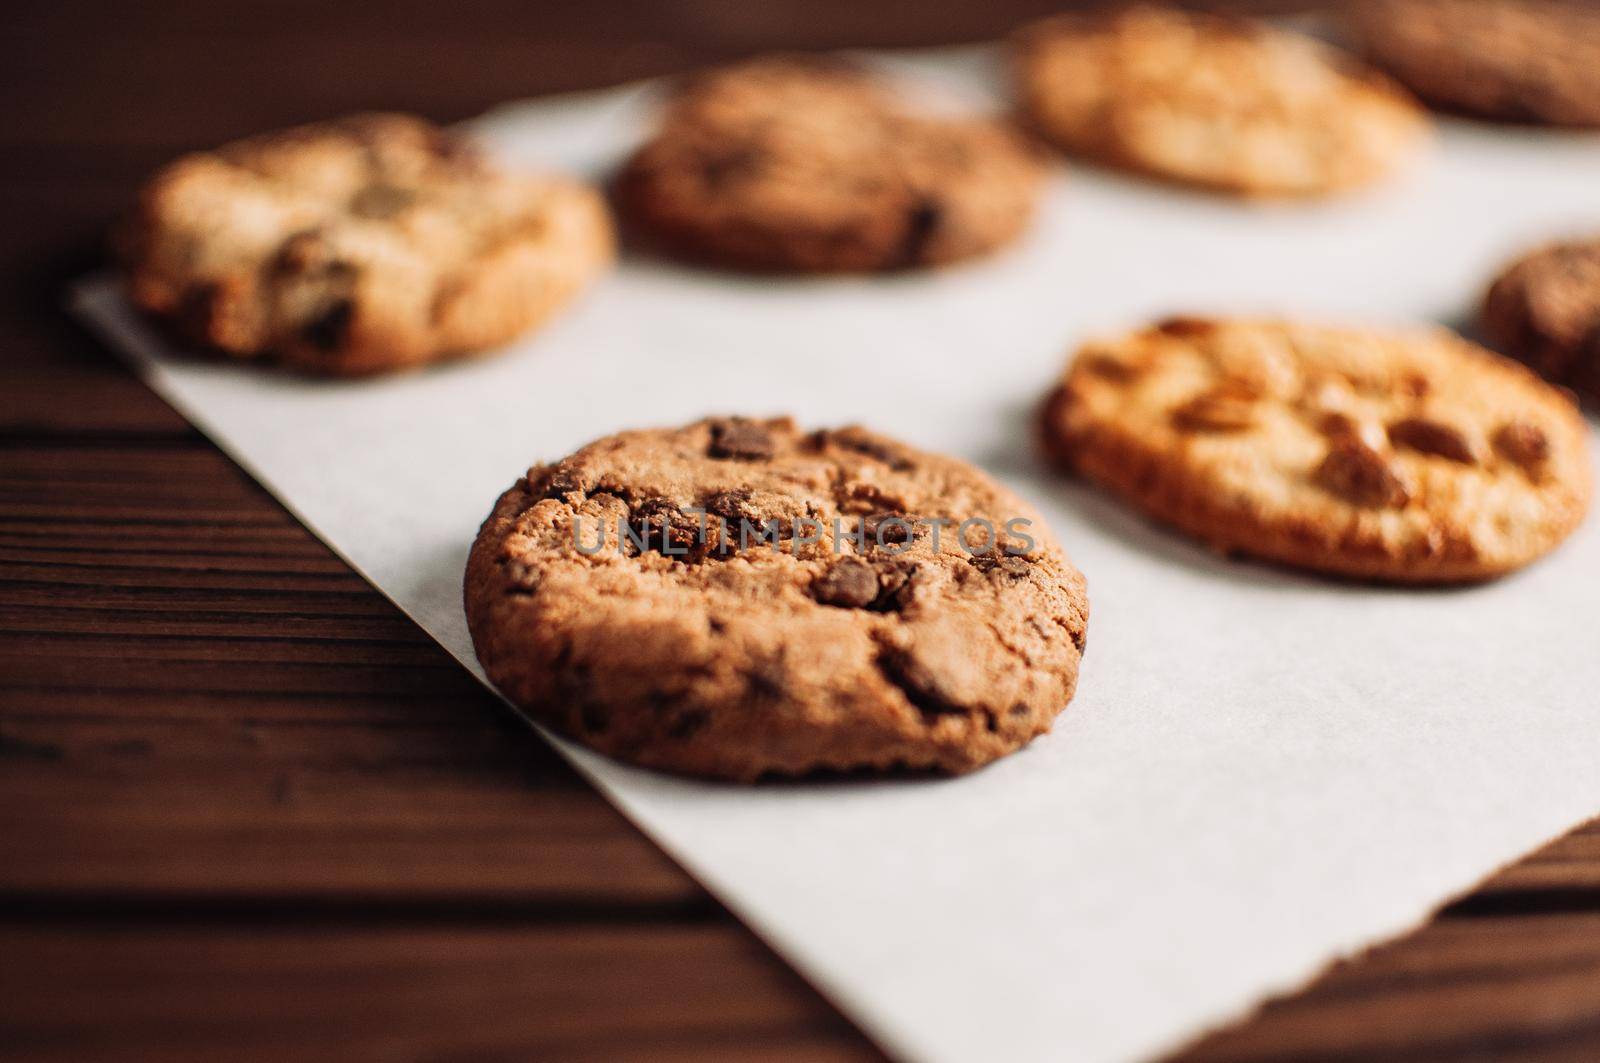 Chocolate covered cookies lay on a parchment paper in a row. Gluten-free cookies on a wooden table out of the oven. Selective focus